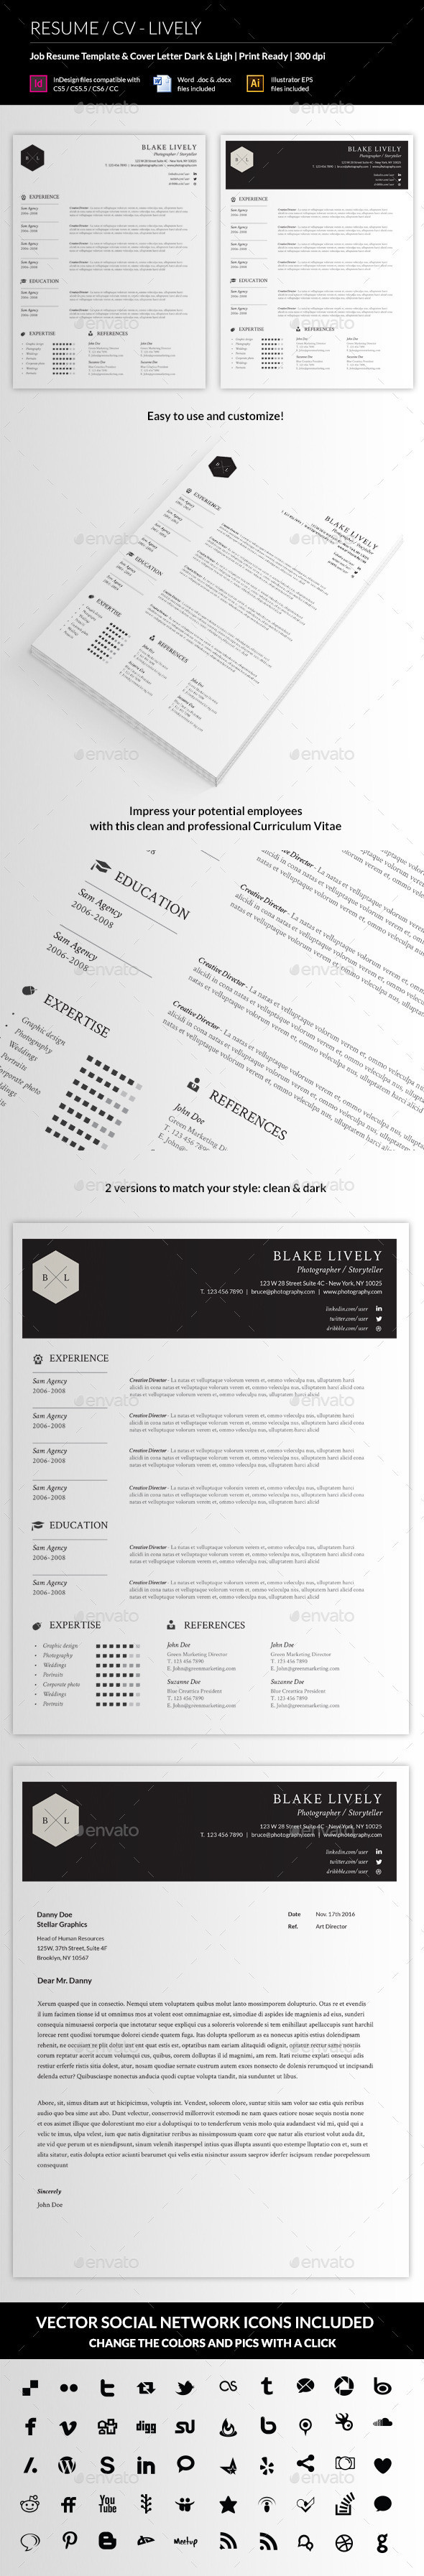 Clean resume cv cover